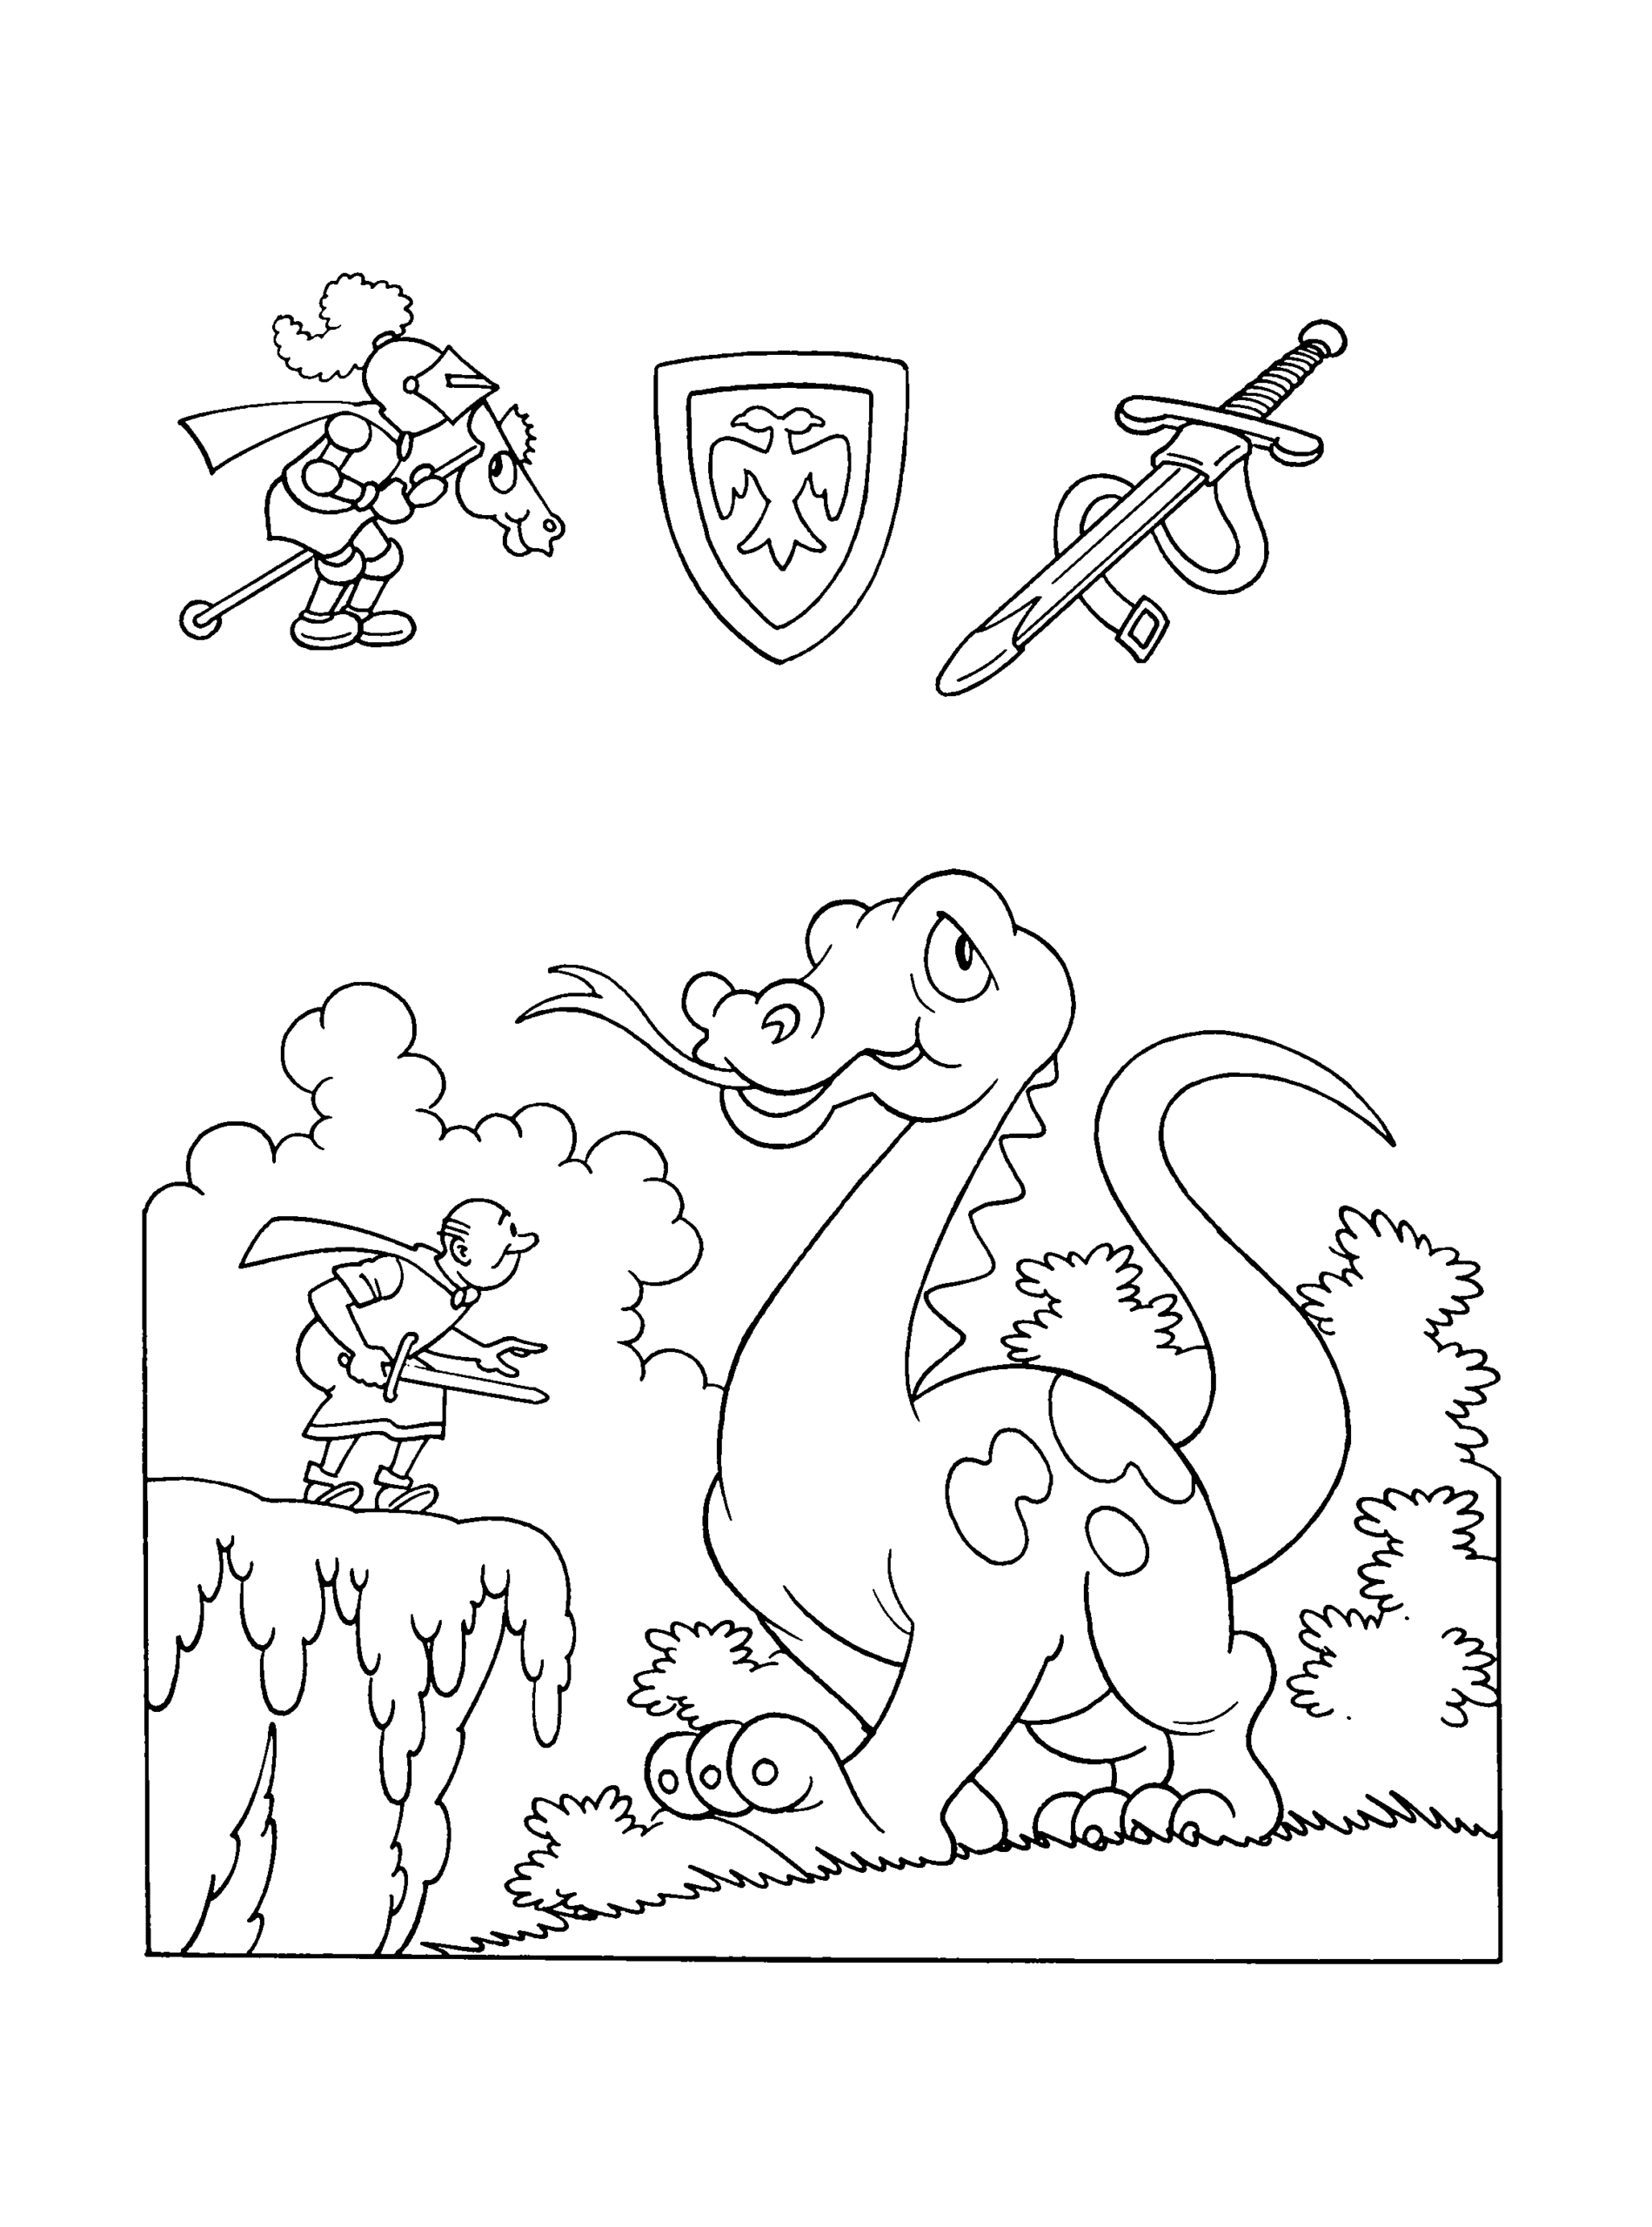 Spike and Suzy Coloring Pages Cartoons spike and suzy 22 Printable 2020 5909 Coloring4free